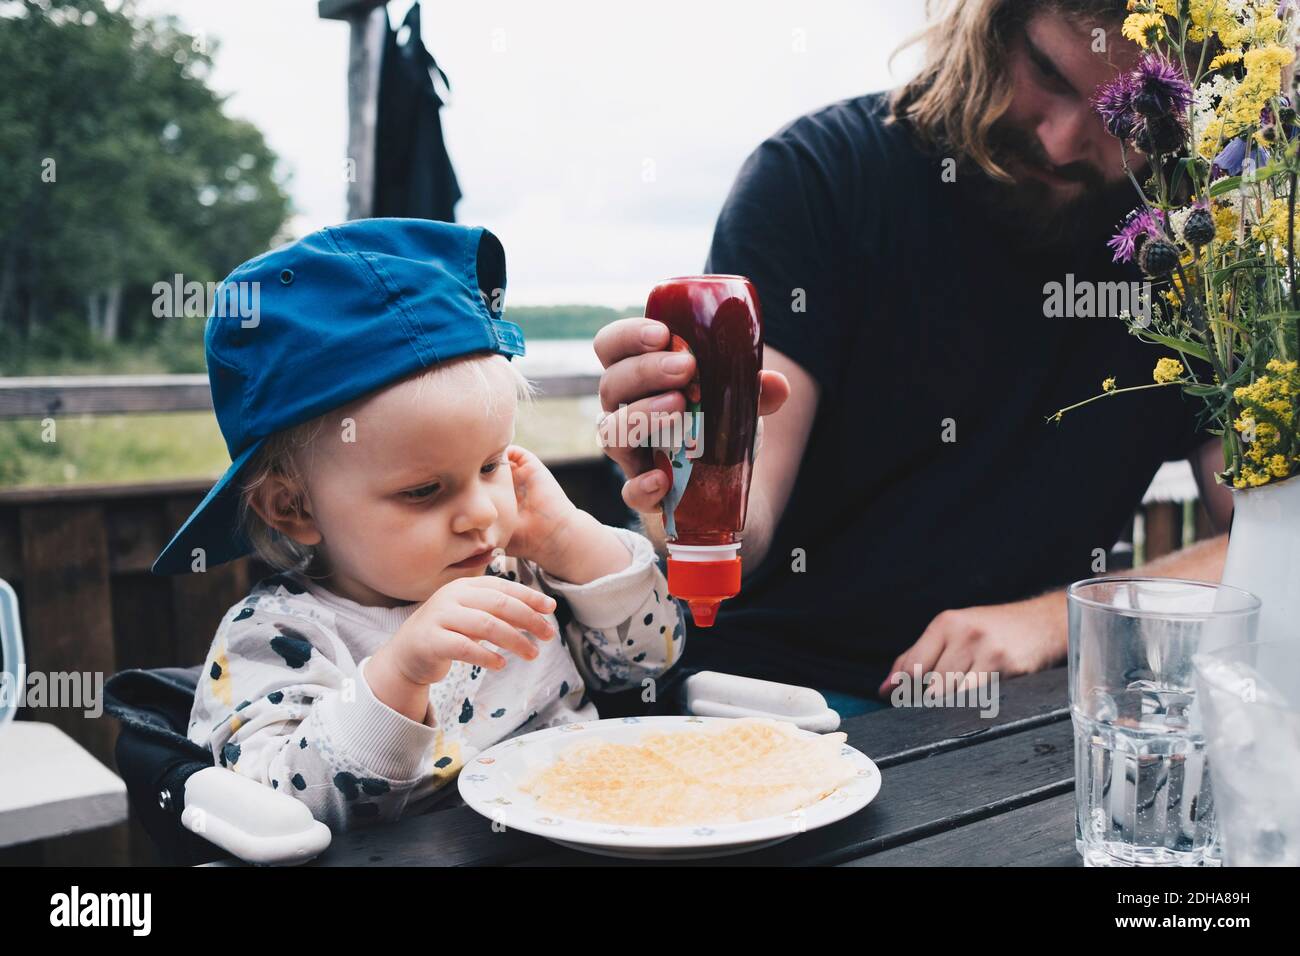 Girl looking at father squeezing honey on waffles at table Stock Photo